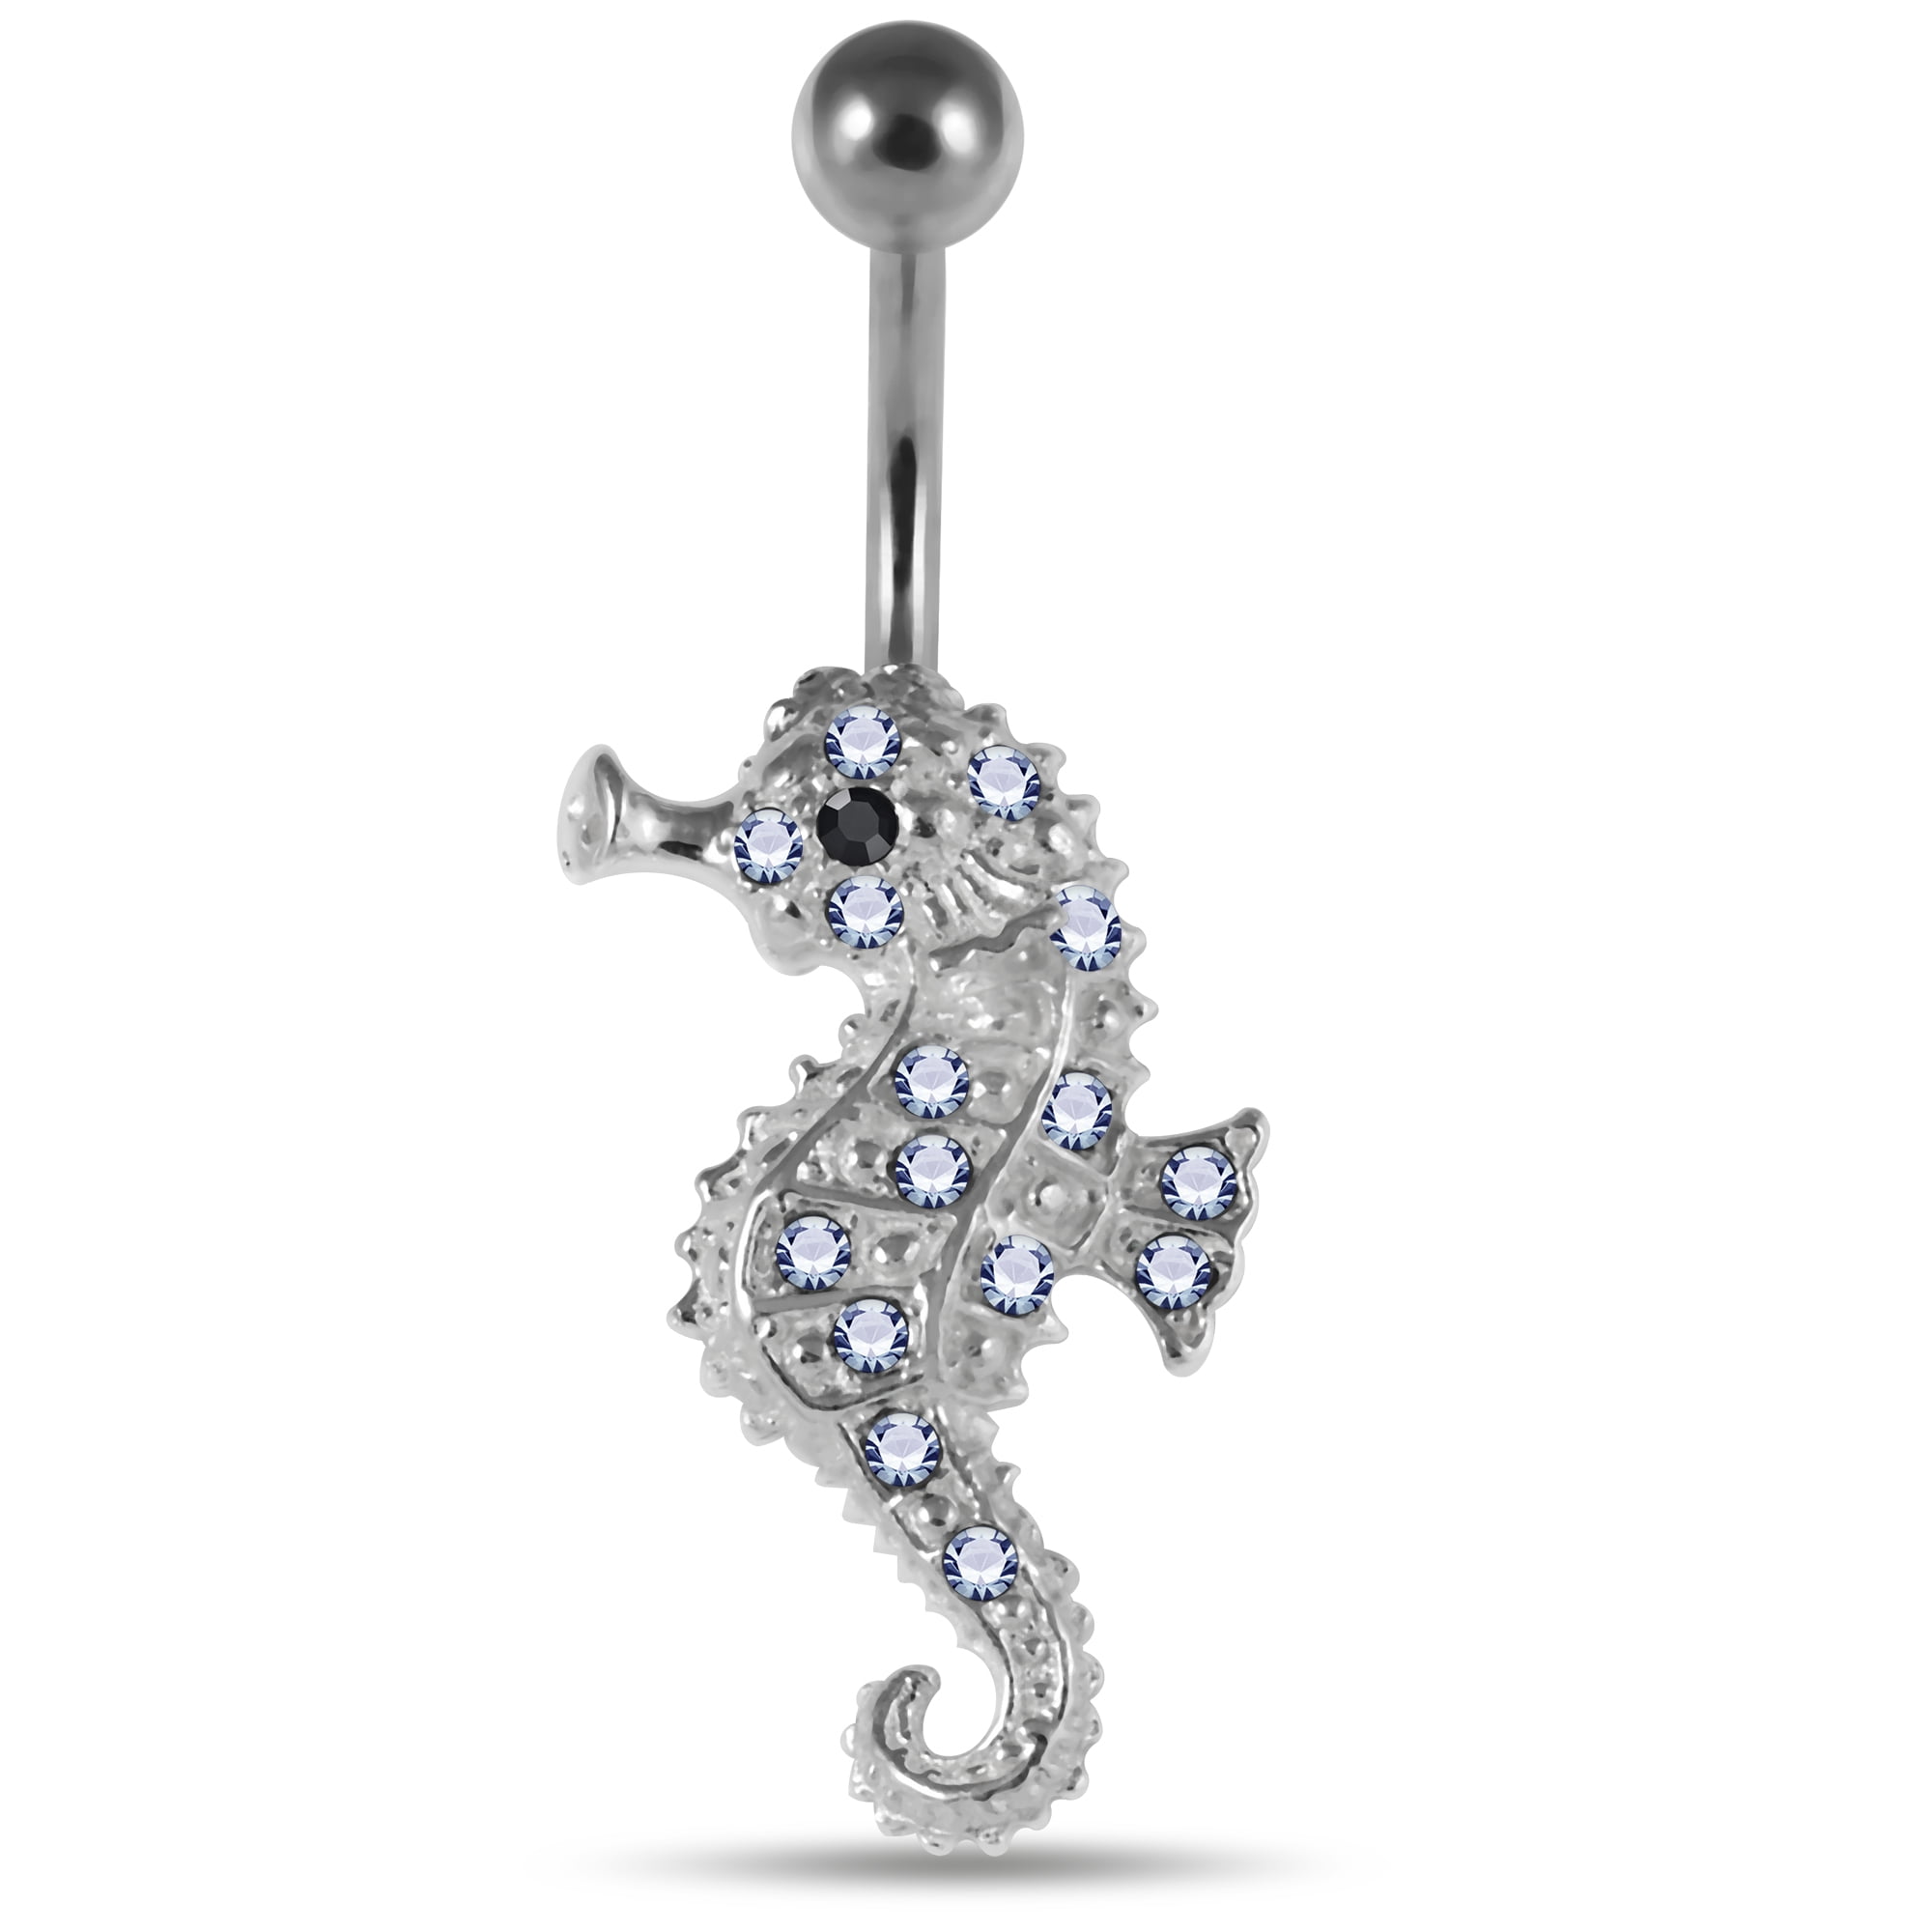 Multi Crystal Stone Foot Design 925 Sterling Silver Belly Button Piercing Ring Jewelry 